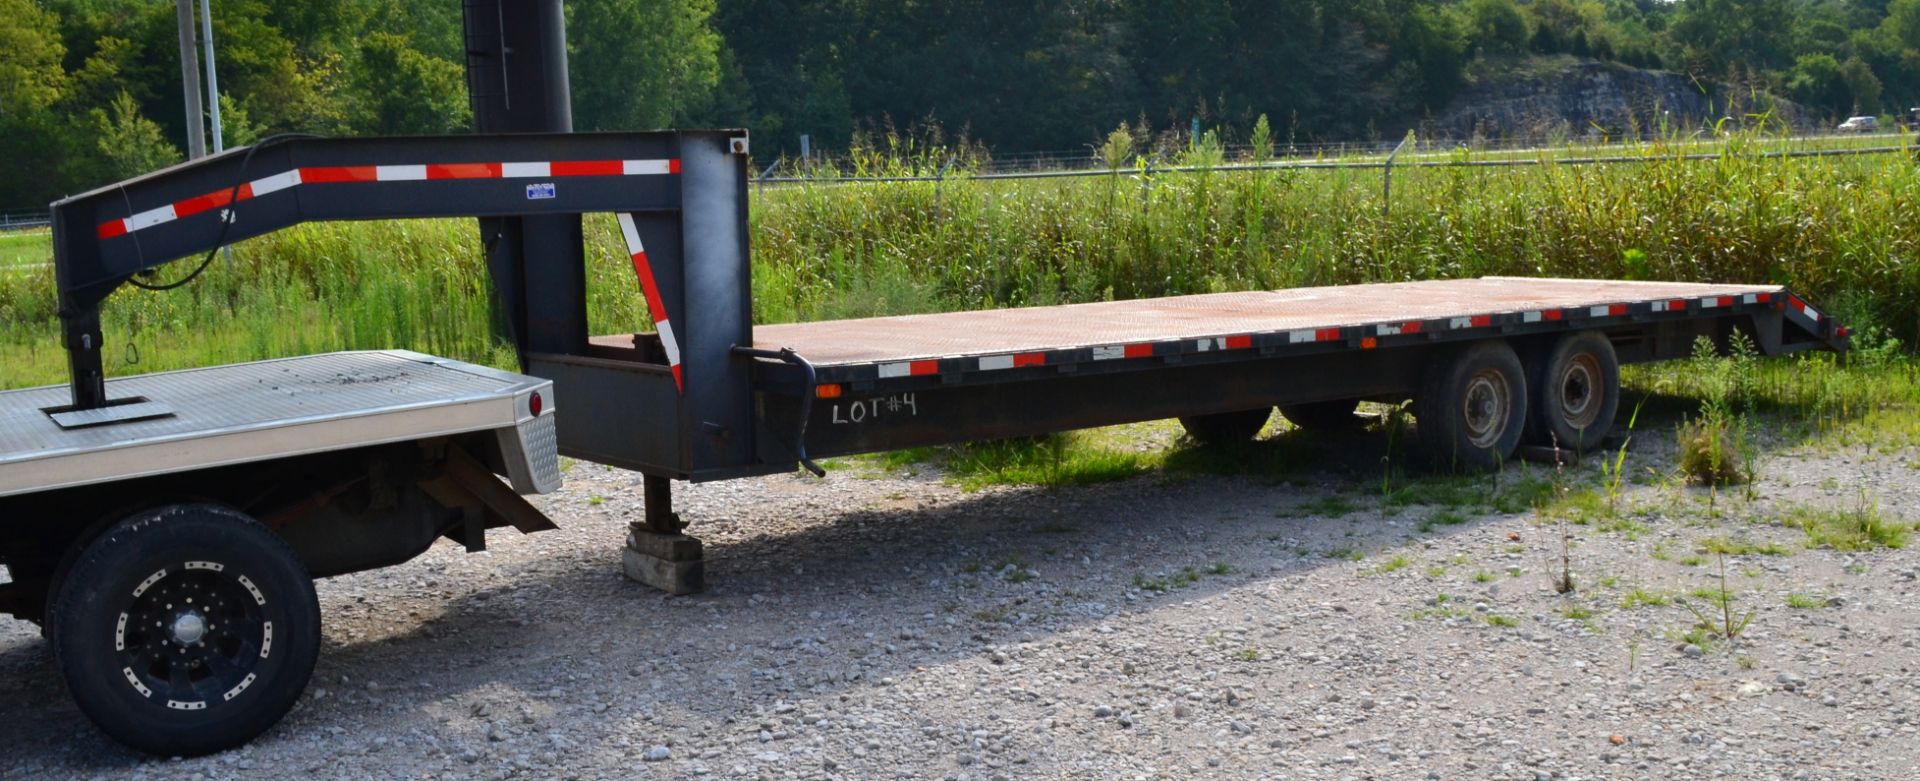 1996 David Utility Trailers 24' Tandem Axle Flatbed Gooseneck Trailer With Dovetail - Image 2 of 5